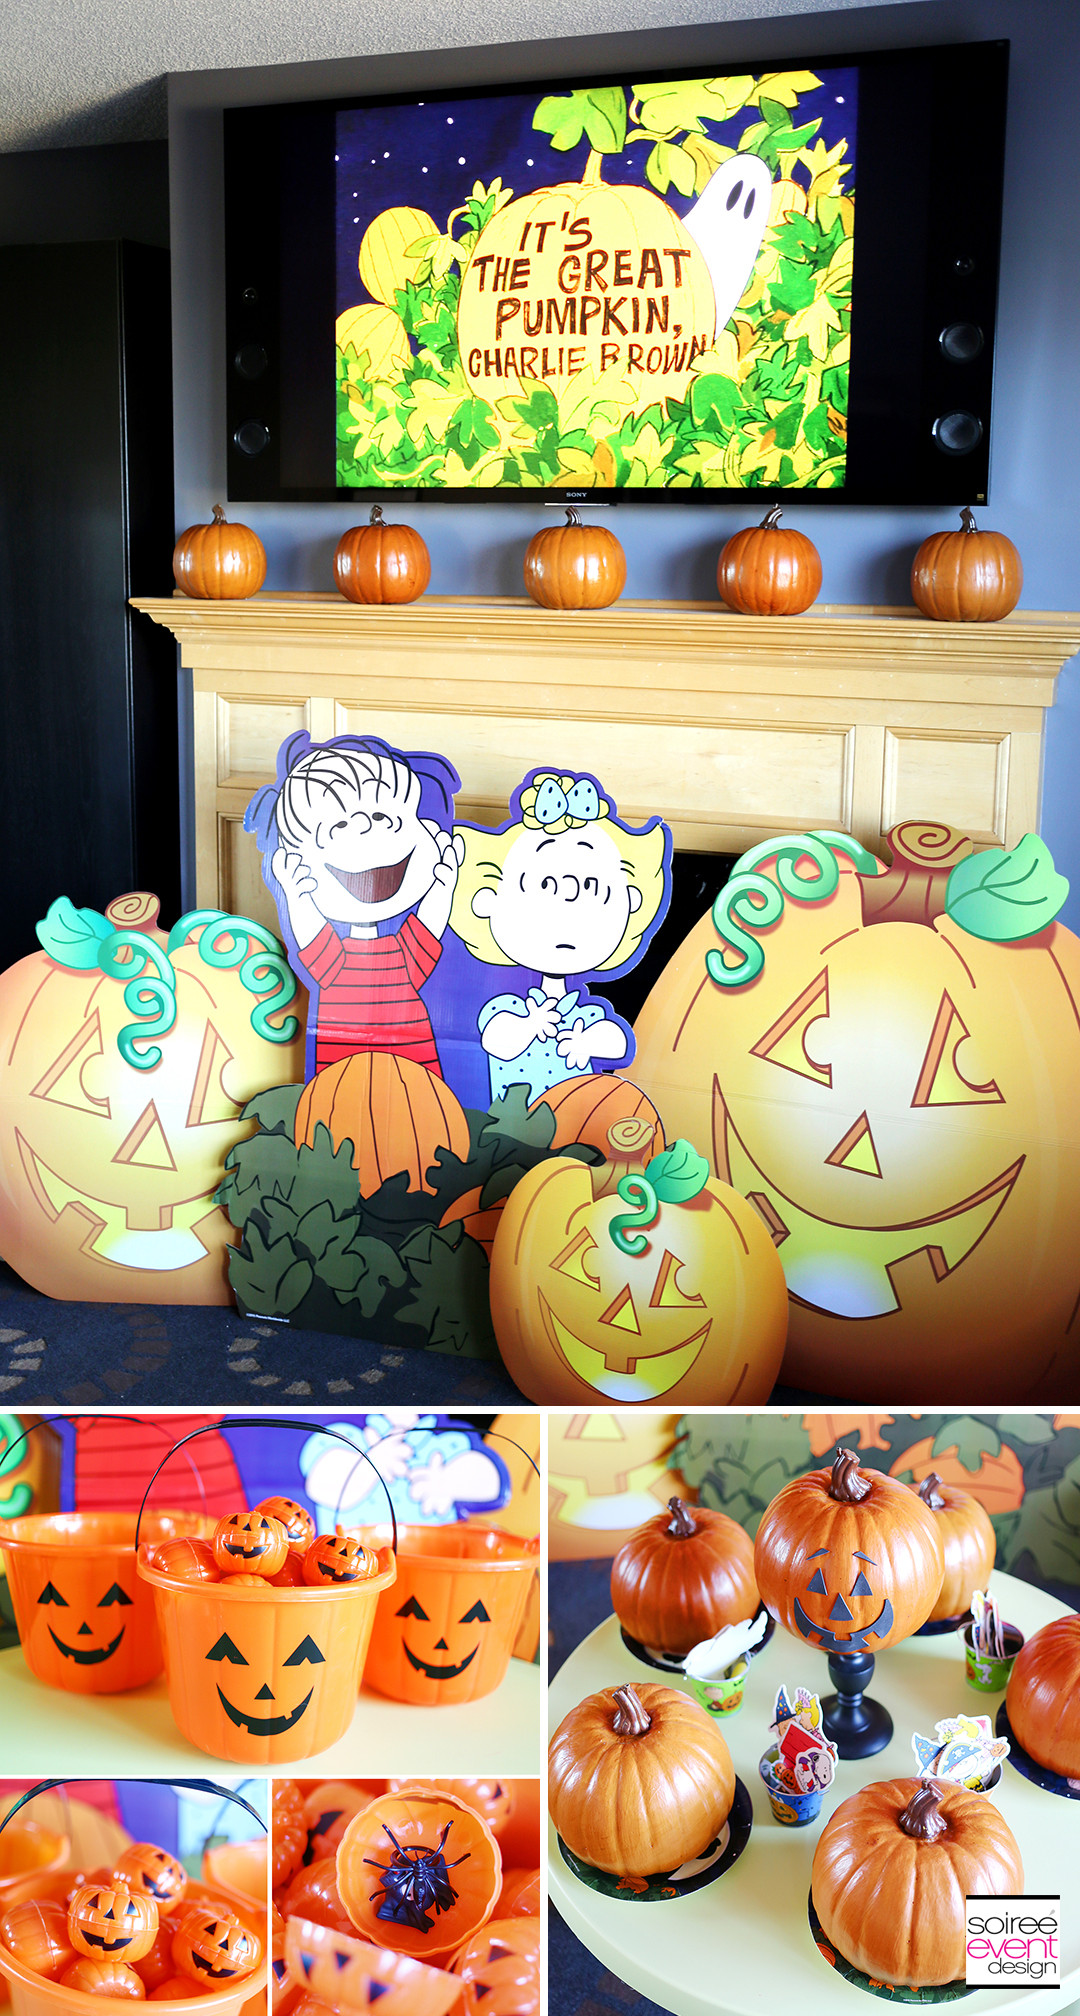 Great Halloween Party Ideas
 It s The Great Pumpkin Charlie Brown Halloween Party